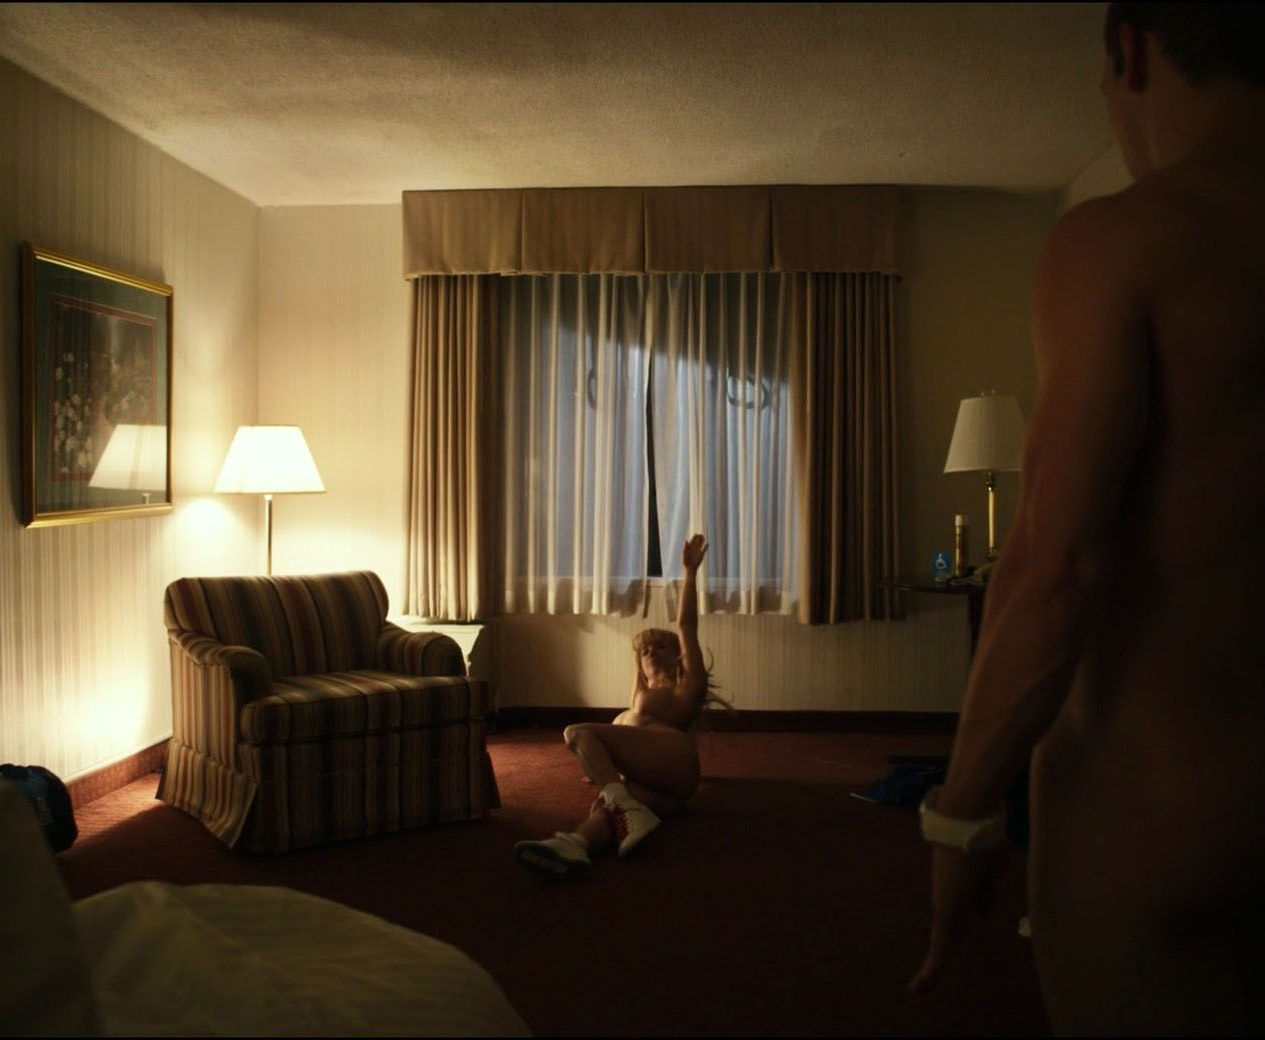 In one of the scenes we can see her having sex completely naked. 